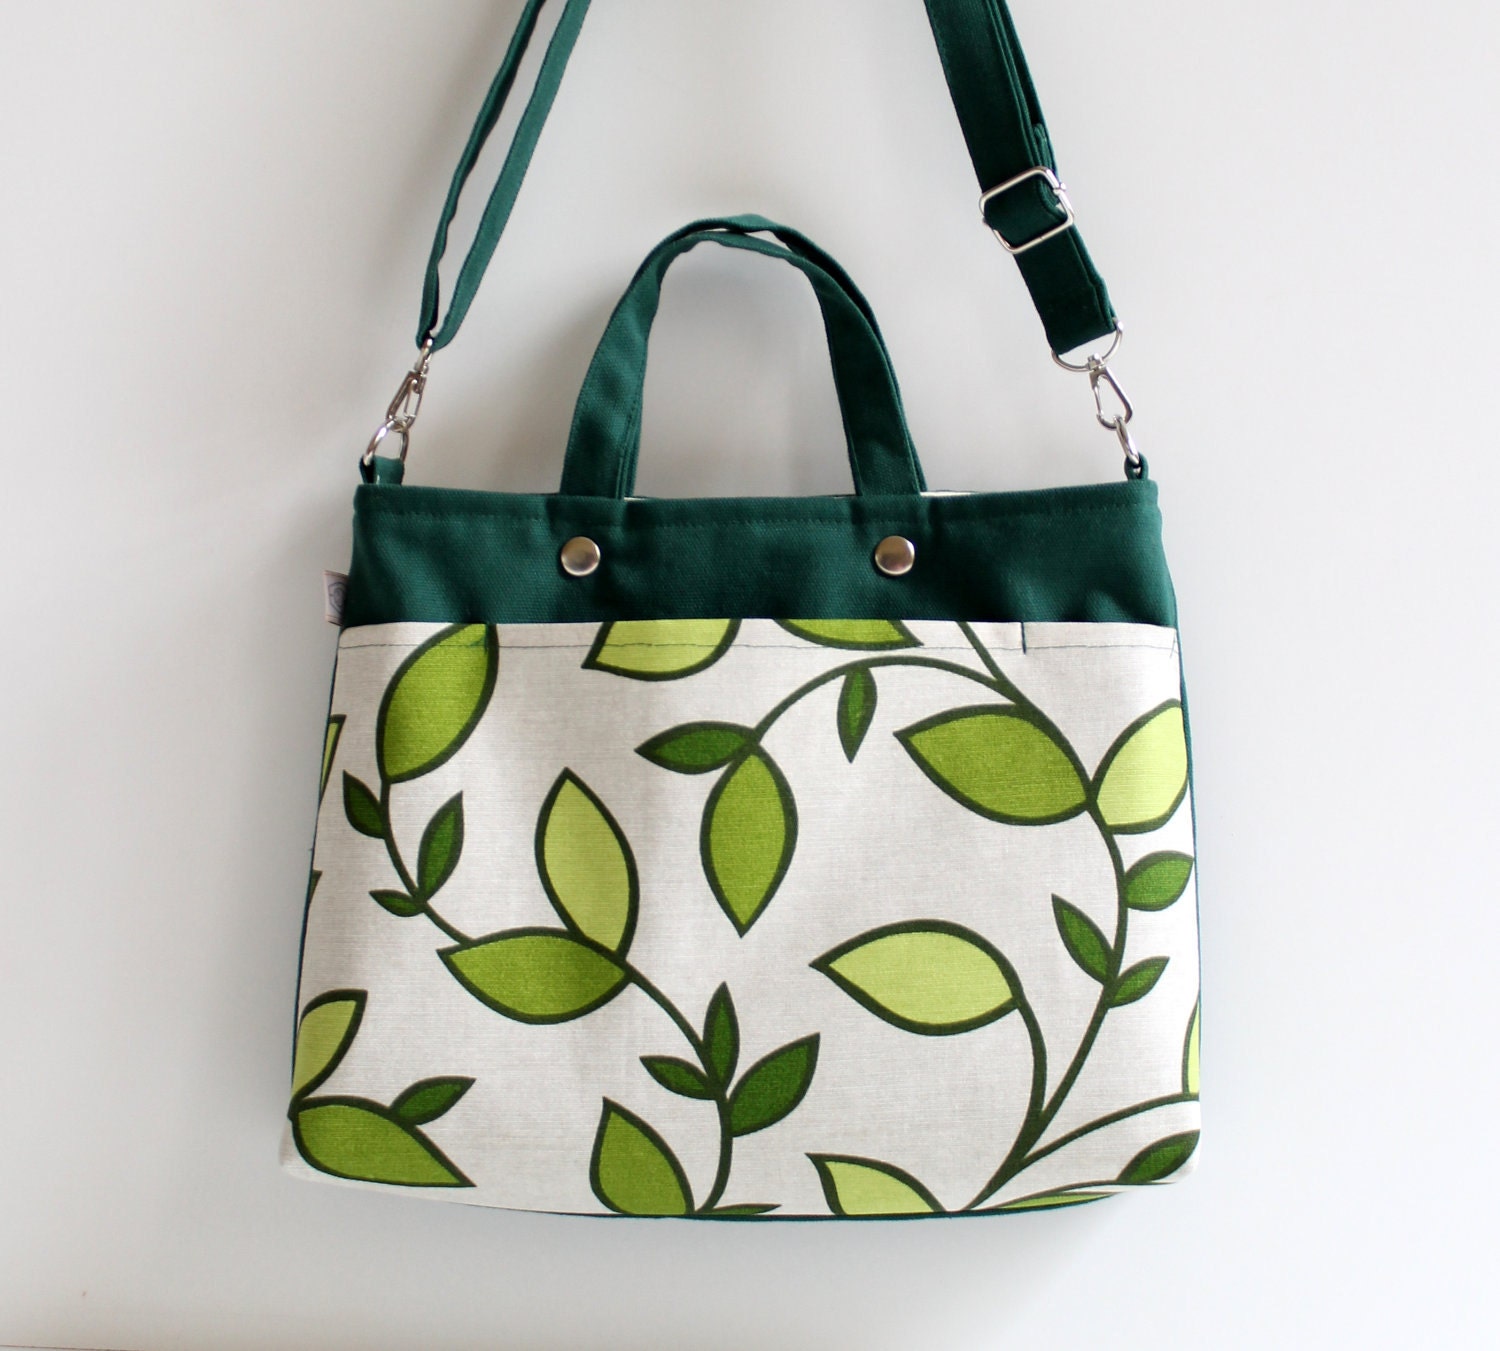 SALE Mini Laptop Bag in Emerald Green Beautiful Daphne Leaves / Macbook / Ipad / Outside Pocket / chartreuse / Spring Fashion / Summer